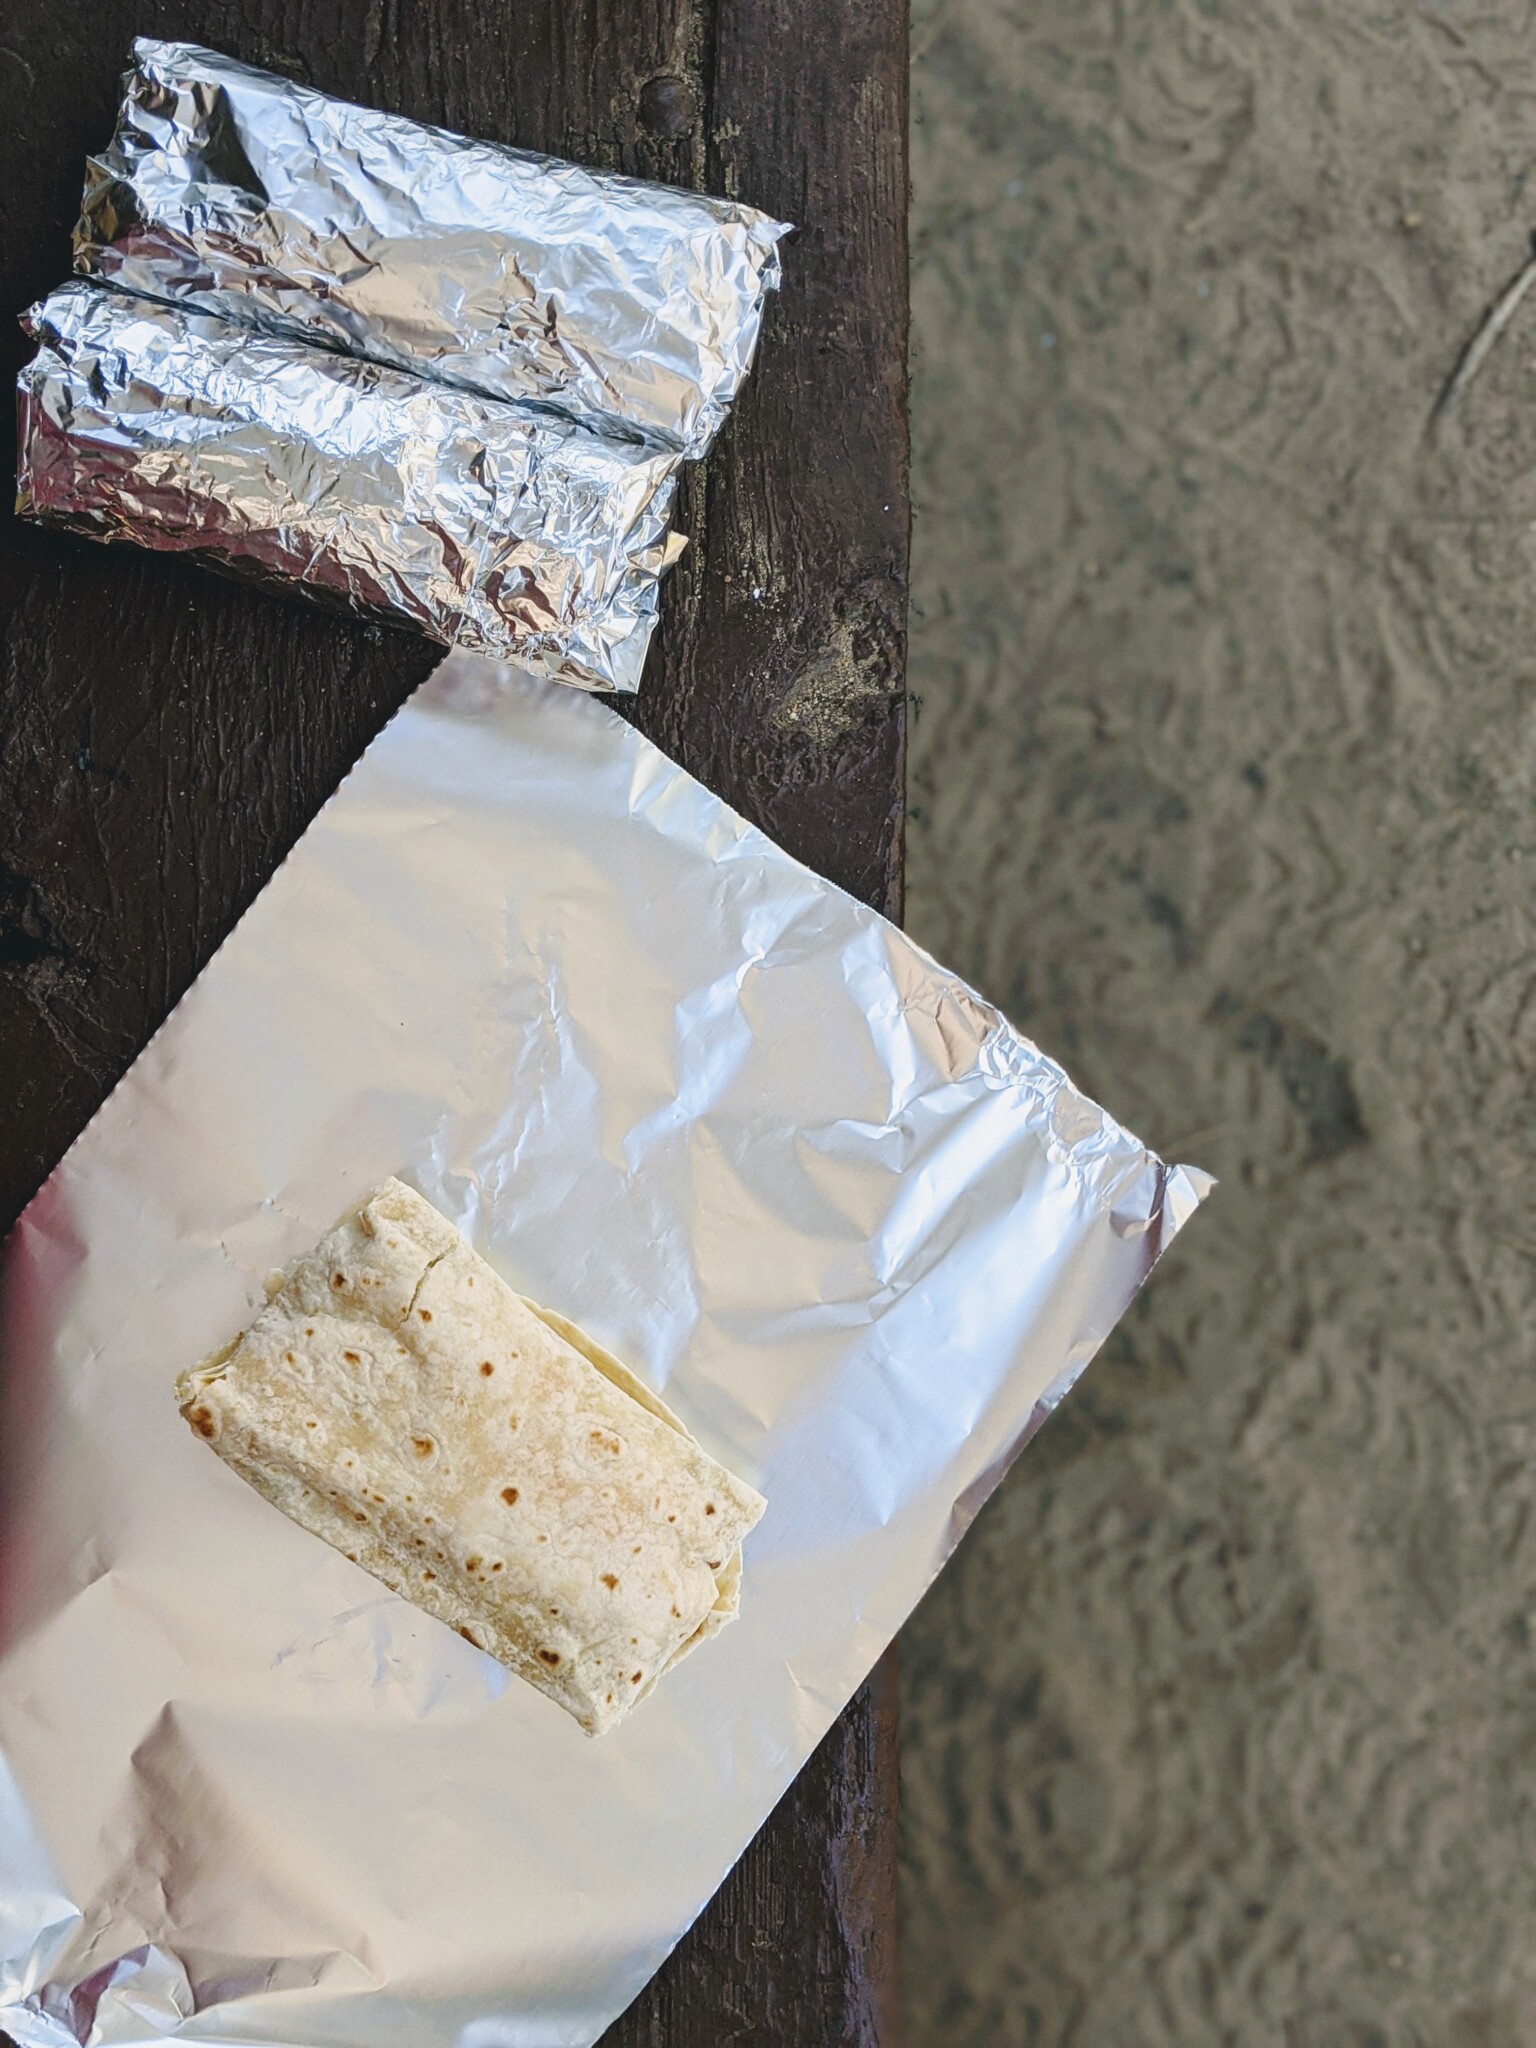 Make ahead burrito being wrapped in foil.